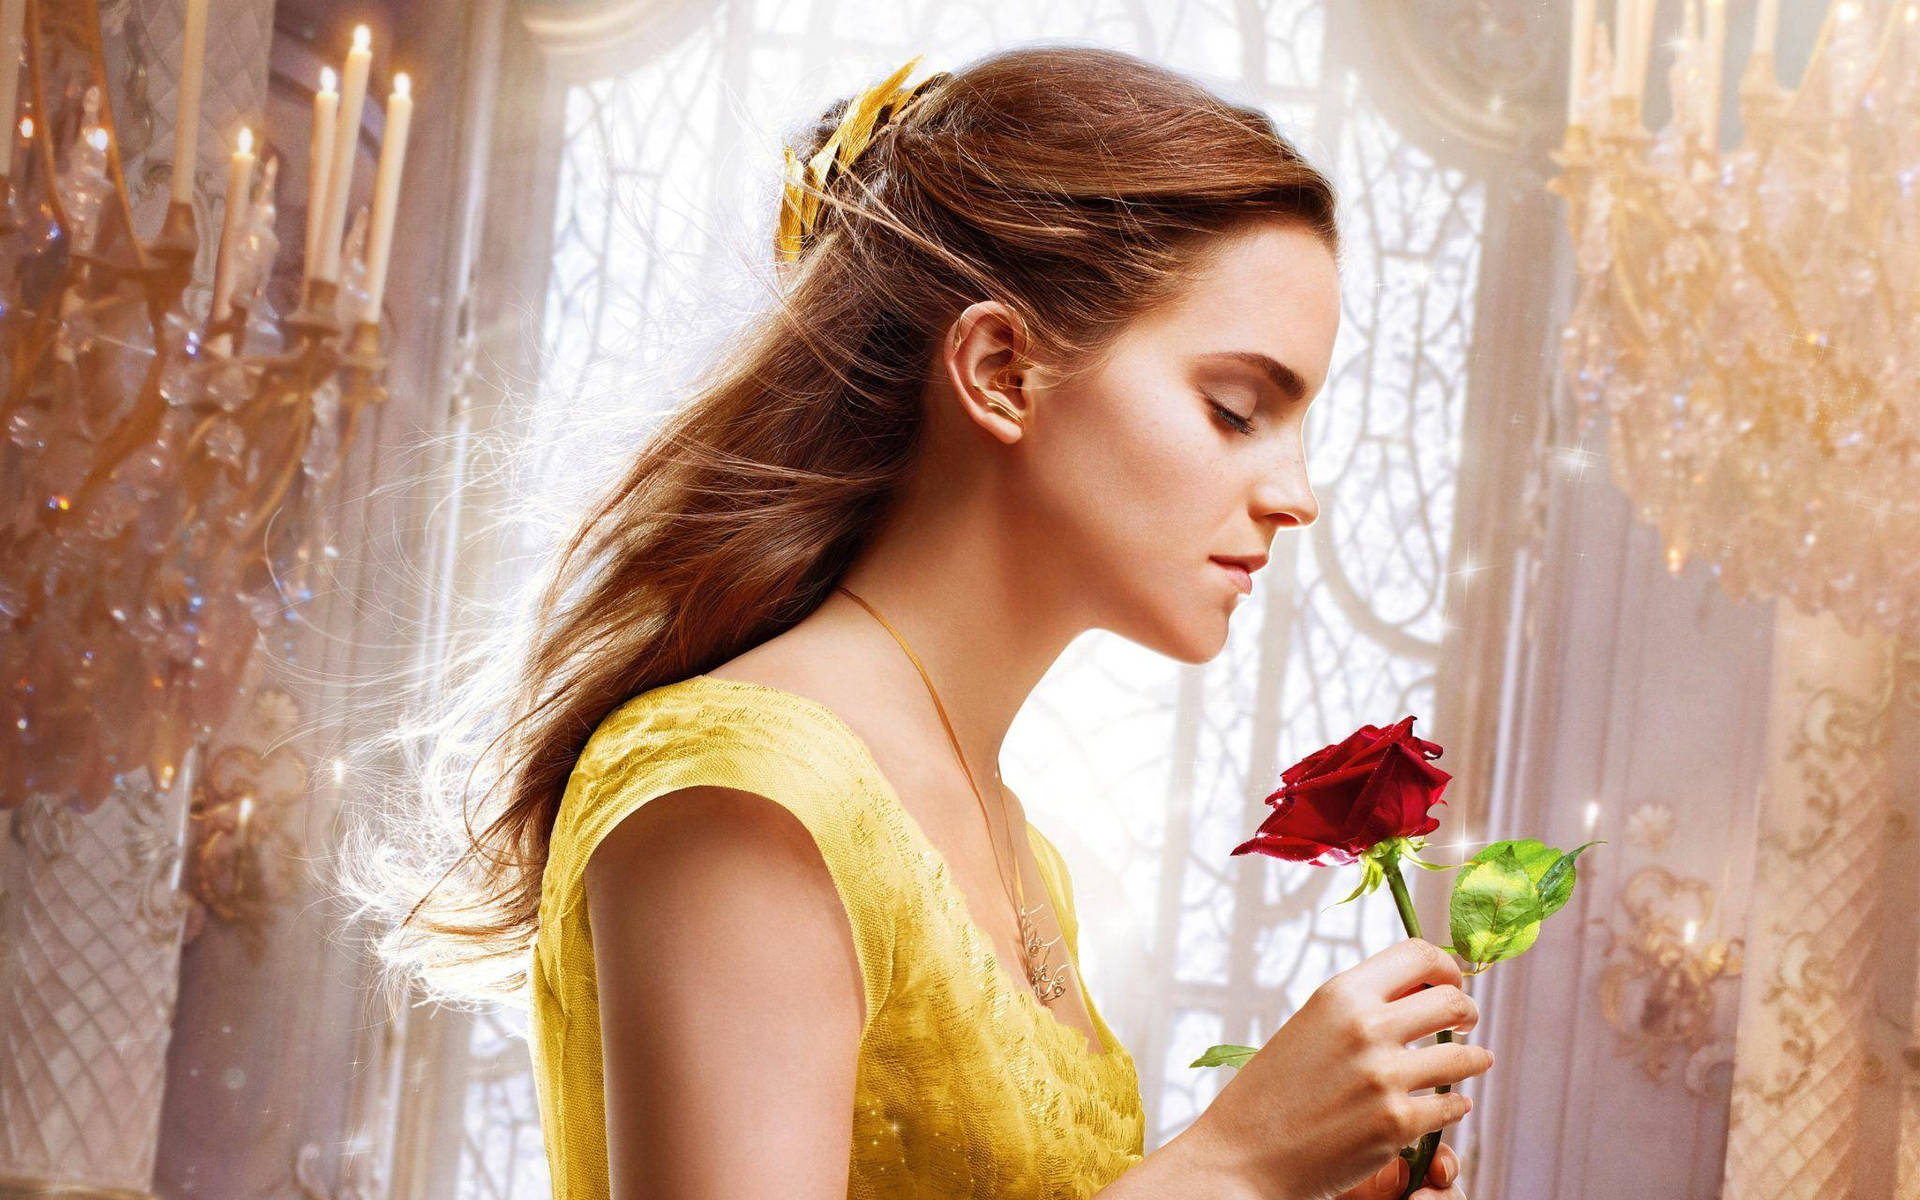 Emma Holding Beauty And The Beast Rose Background